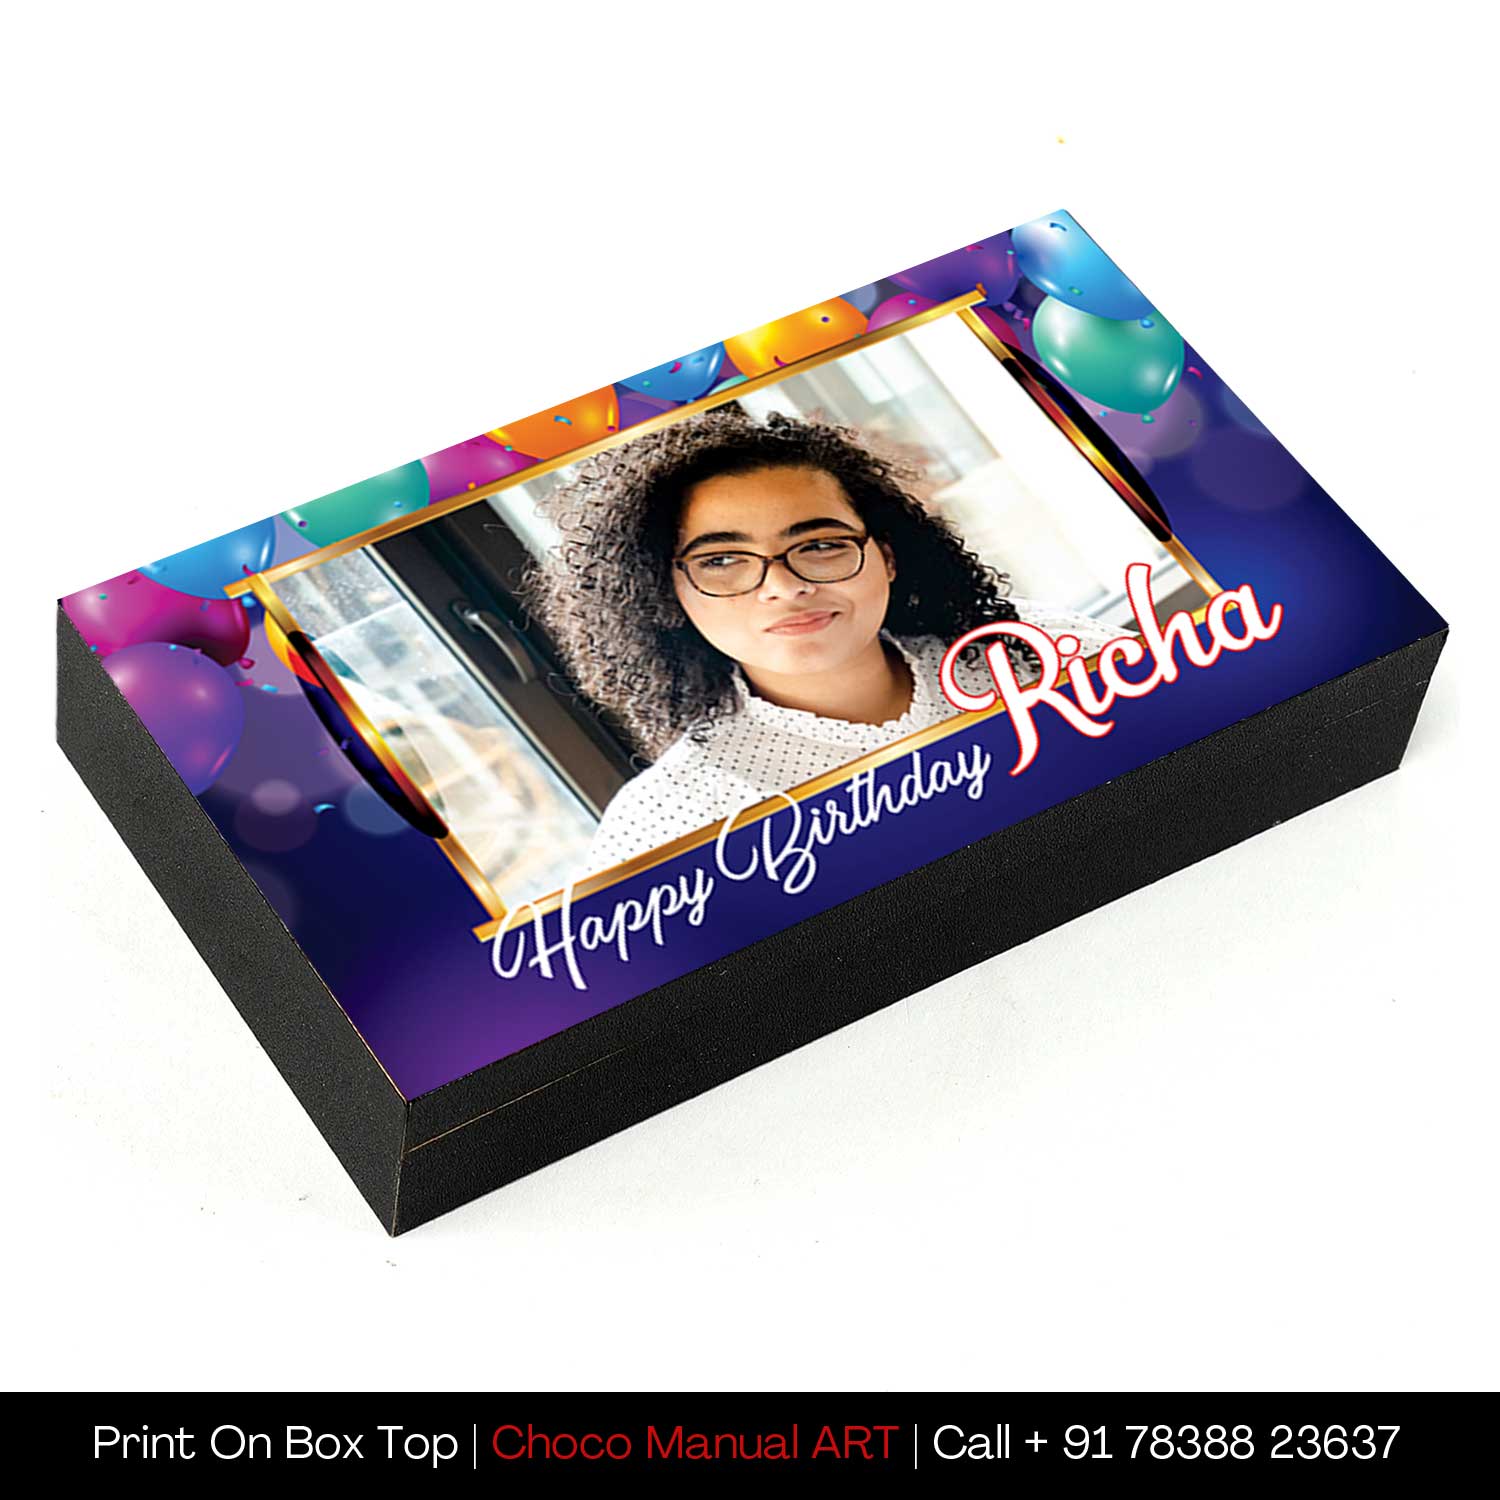 Customized Chocolates Box with Printed Name on it